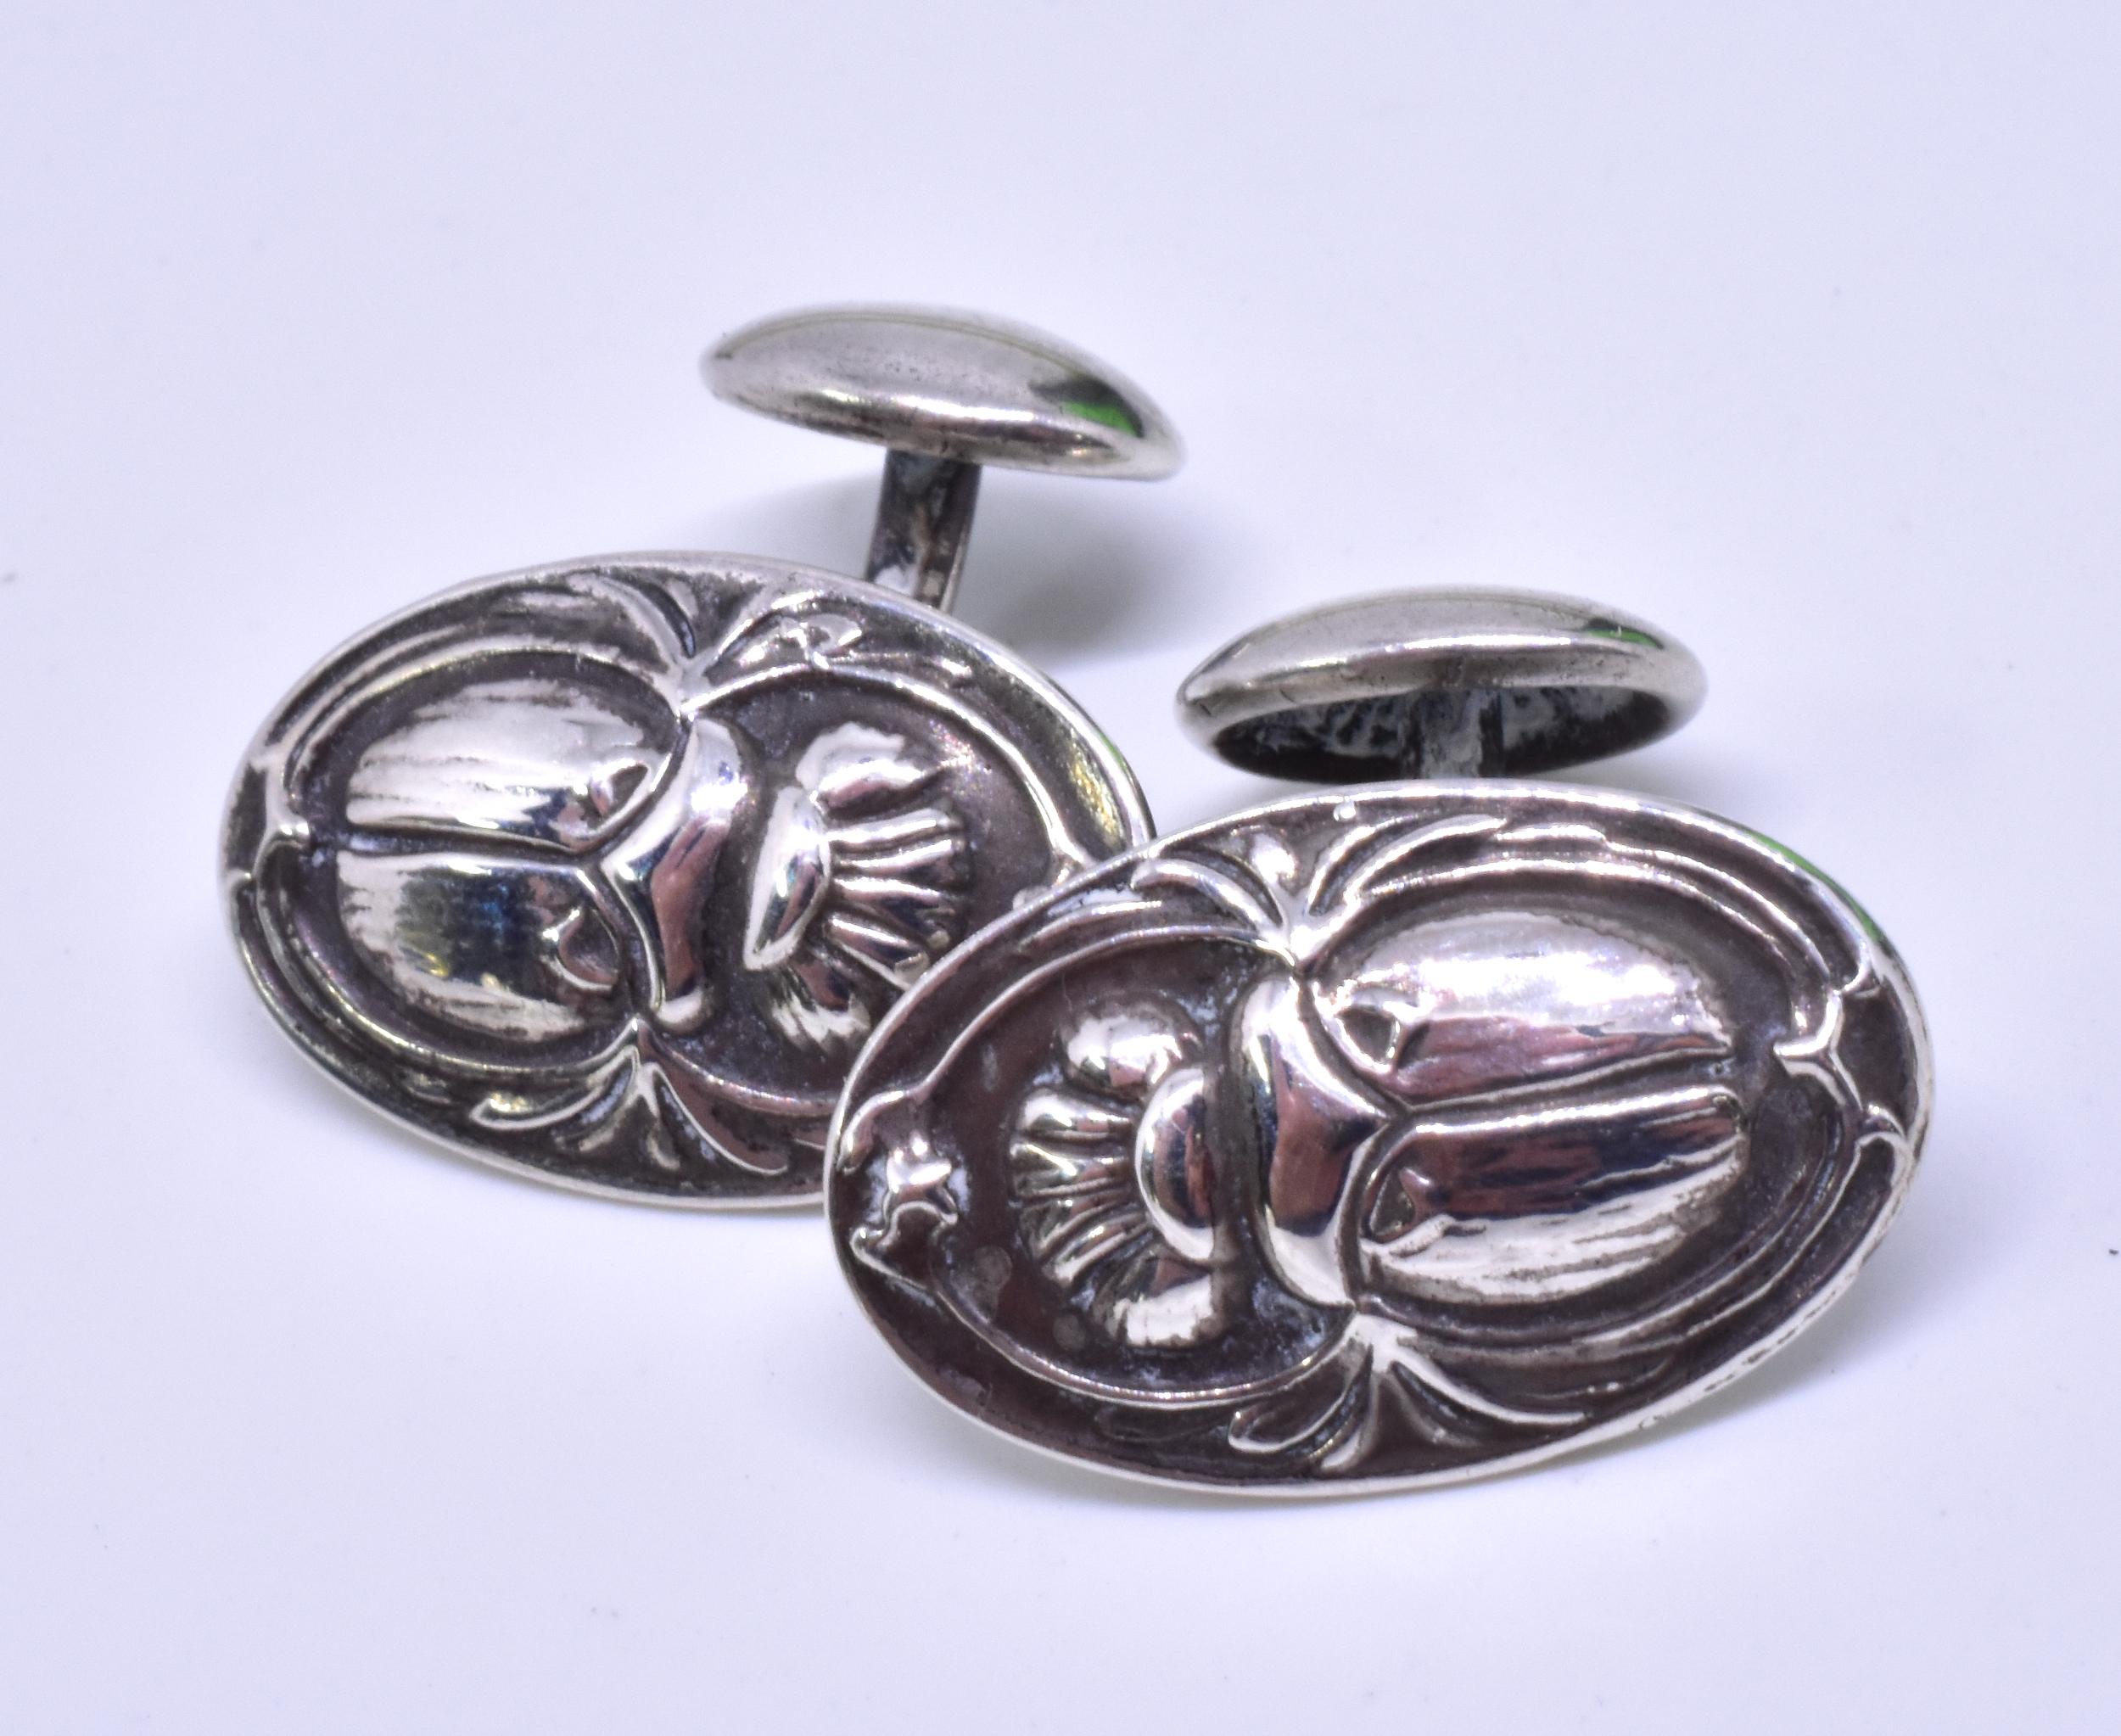 These beautifully crafted Egyptian revival cufflinks of sterling silver scarab beetles are the creation of Herman and Eugene Unger, German immigrants who settled in Newark, NJ and were a part of the immensely creative Art Nouveau period at the turn